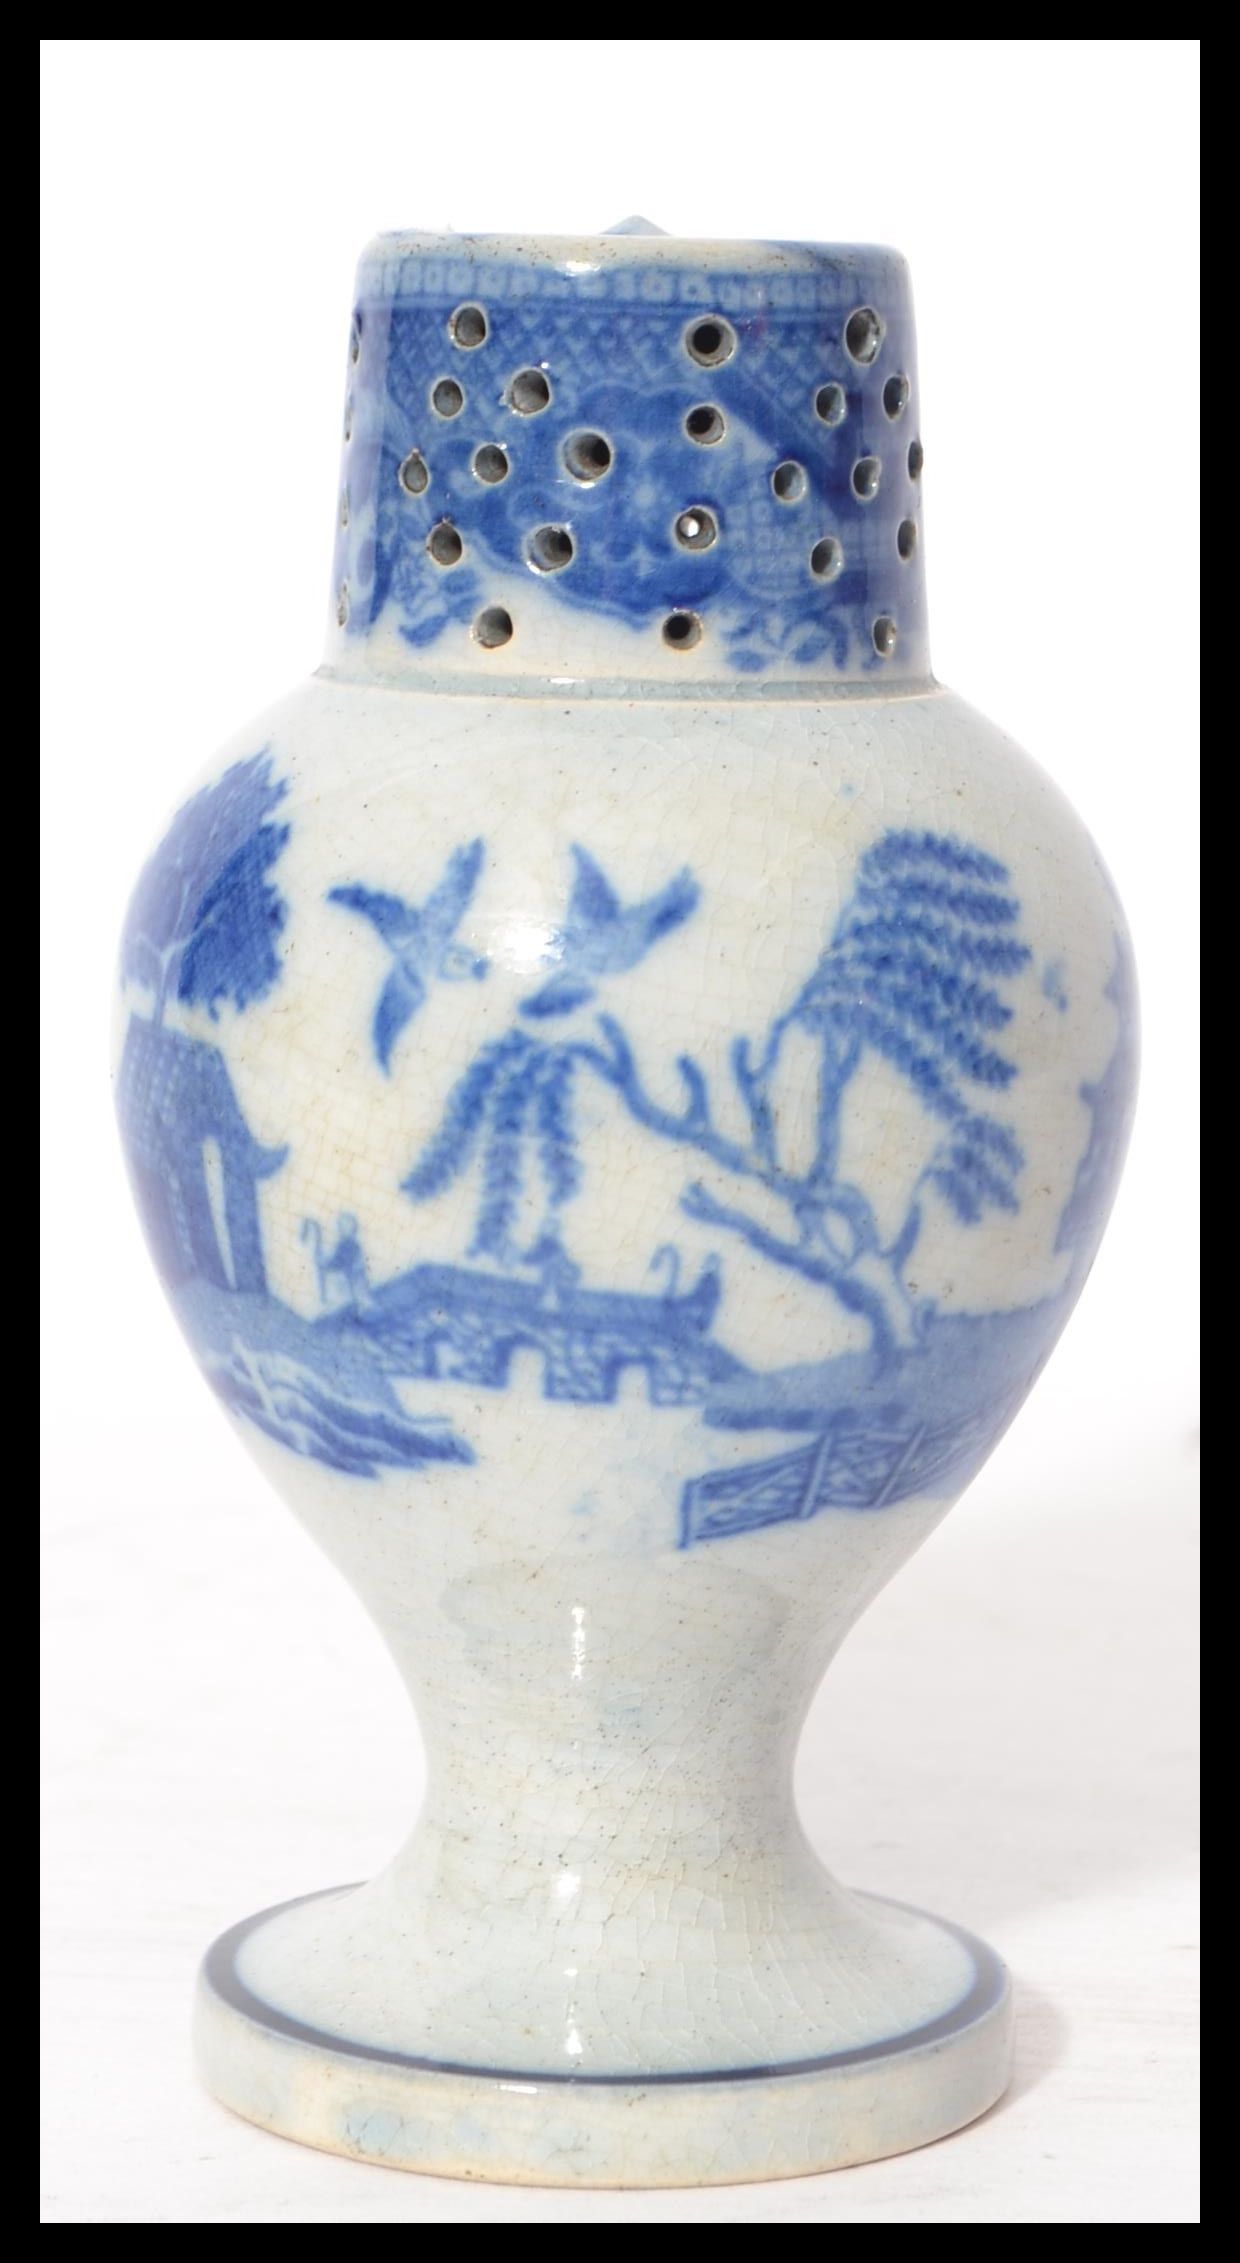 A 19th century blue and white ceramic sander pounce pot having a circular vase with bulbous body and